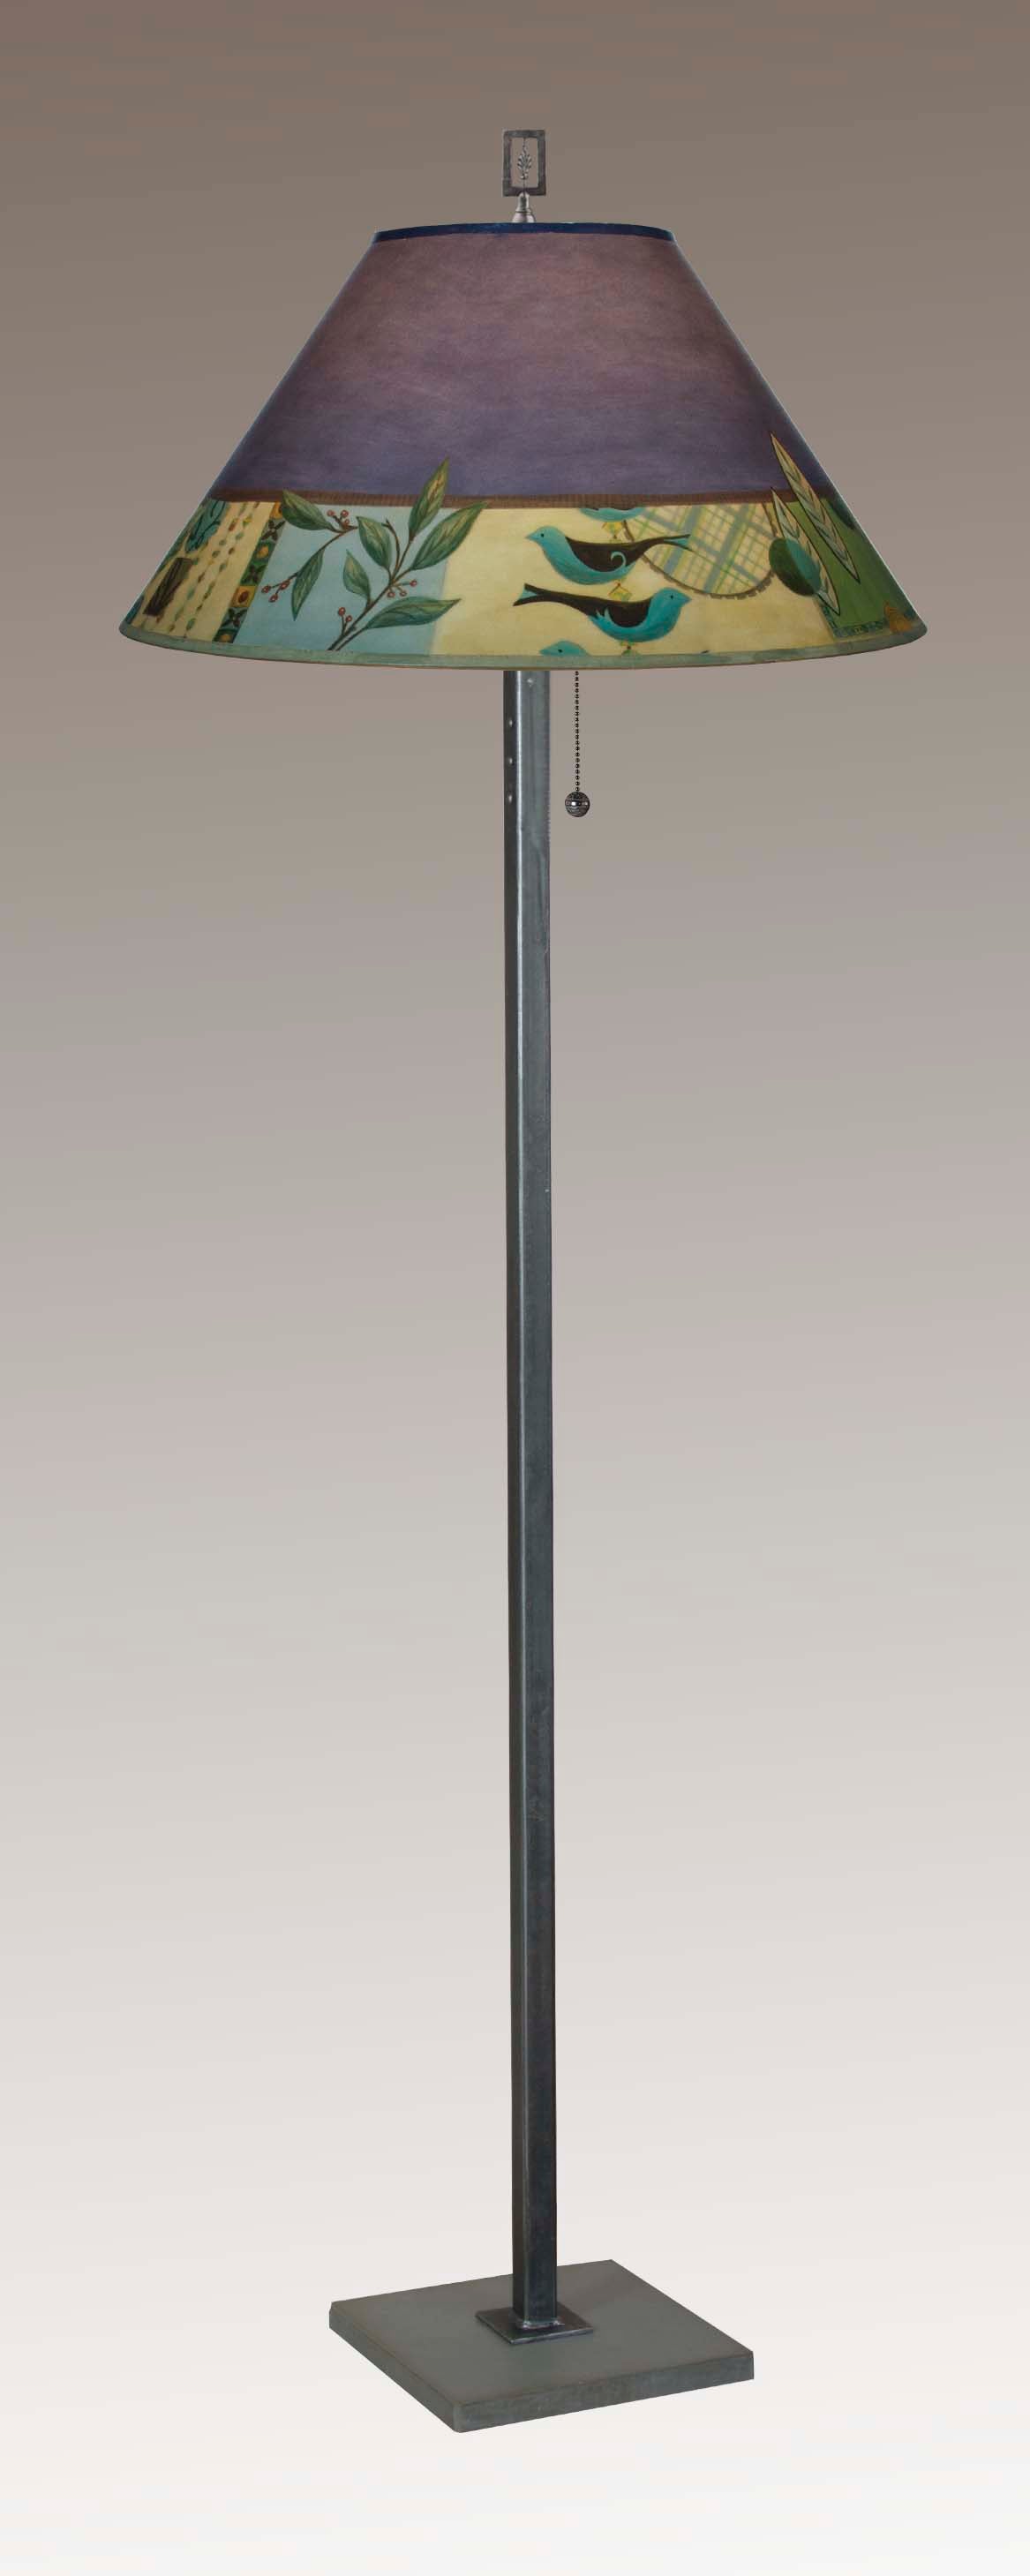 Janna Ugone & Co Floor Lamp Steel Floor Lamp with Large Conical Shade in New Capri Periwinkle